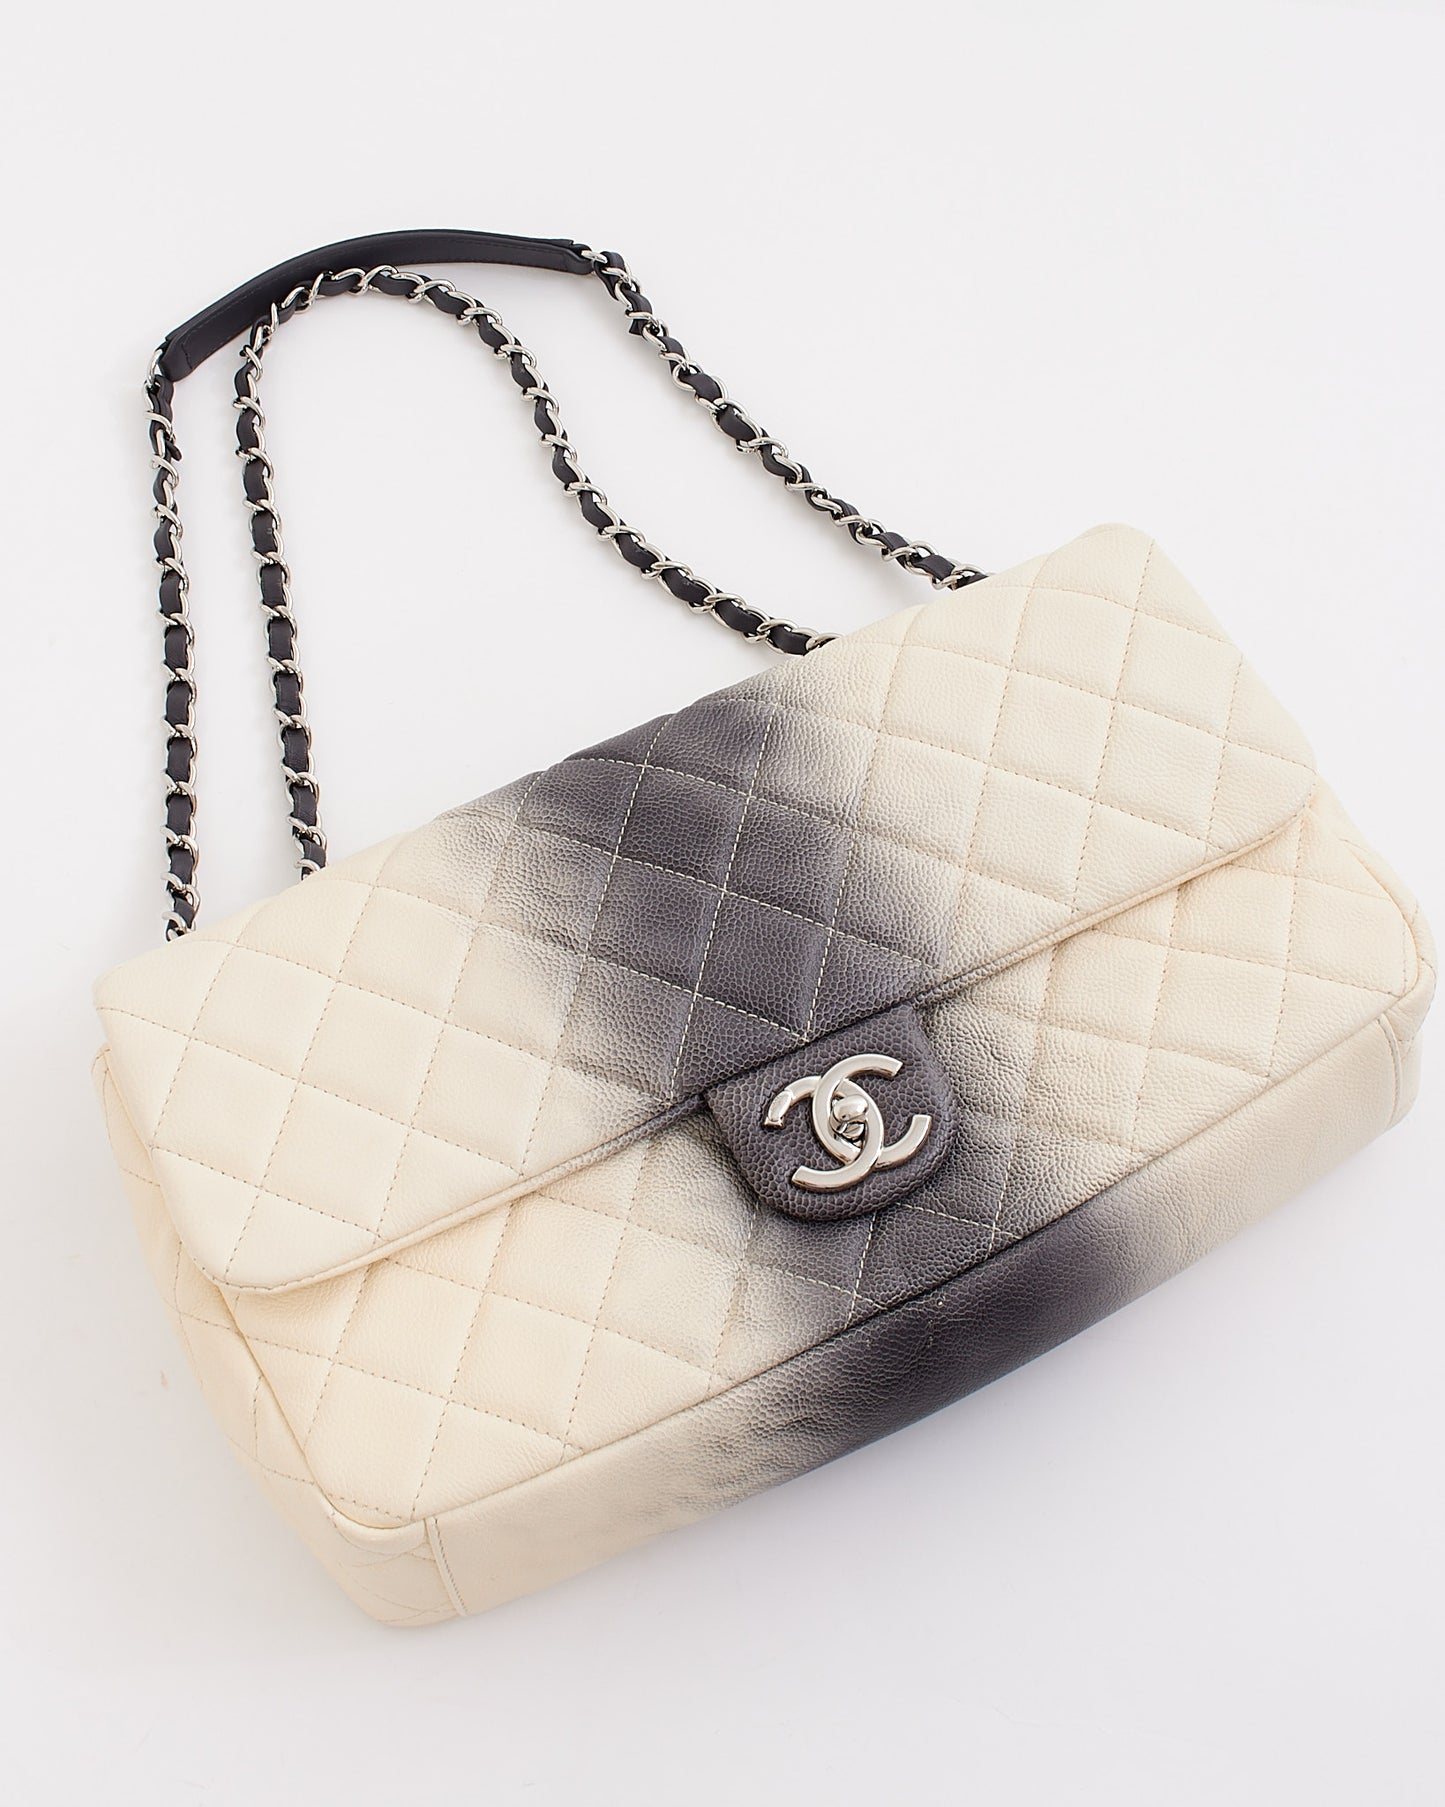 Chanel White and Grey Ombré Quilted Caviar Leather Jumbo Flap Bag